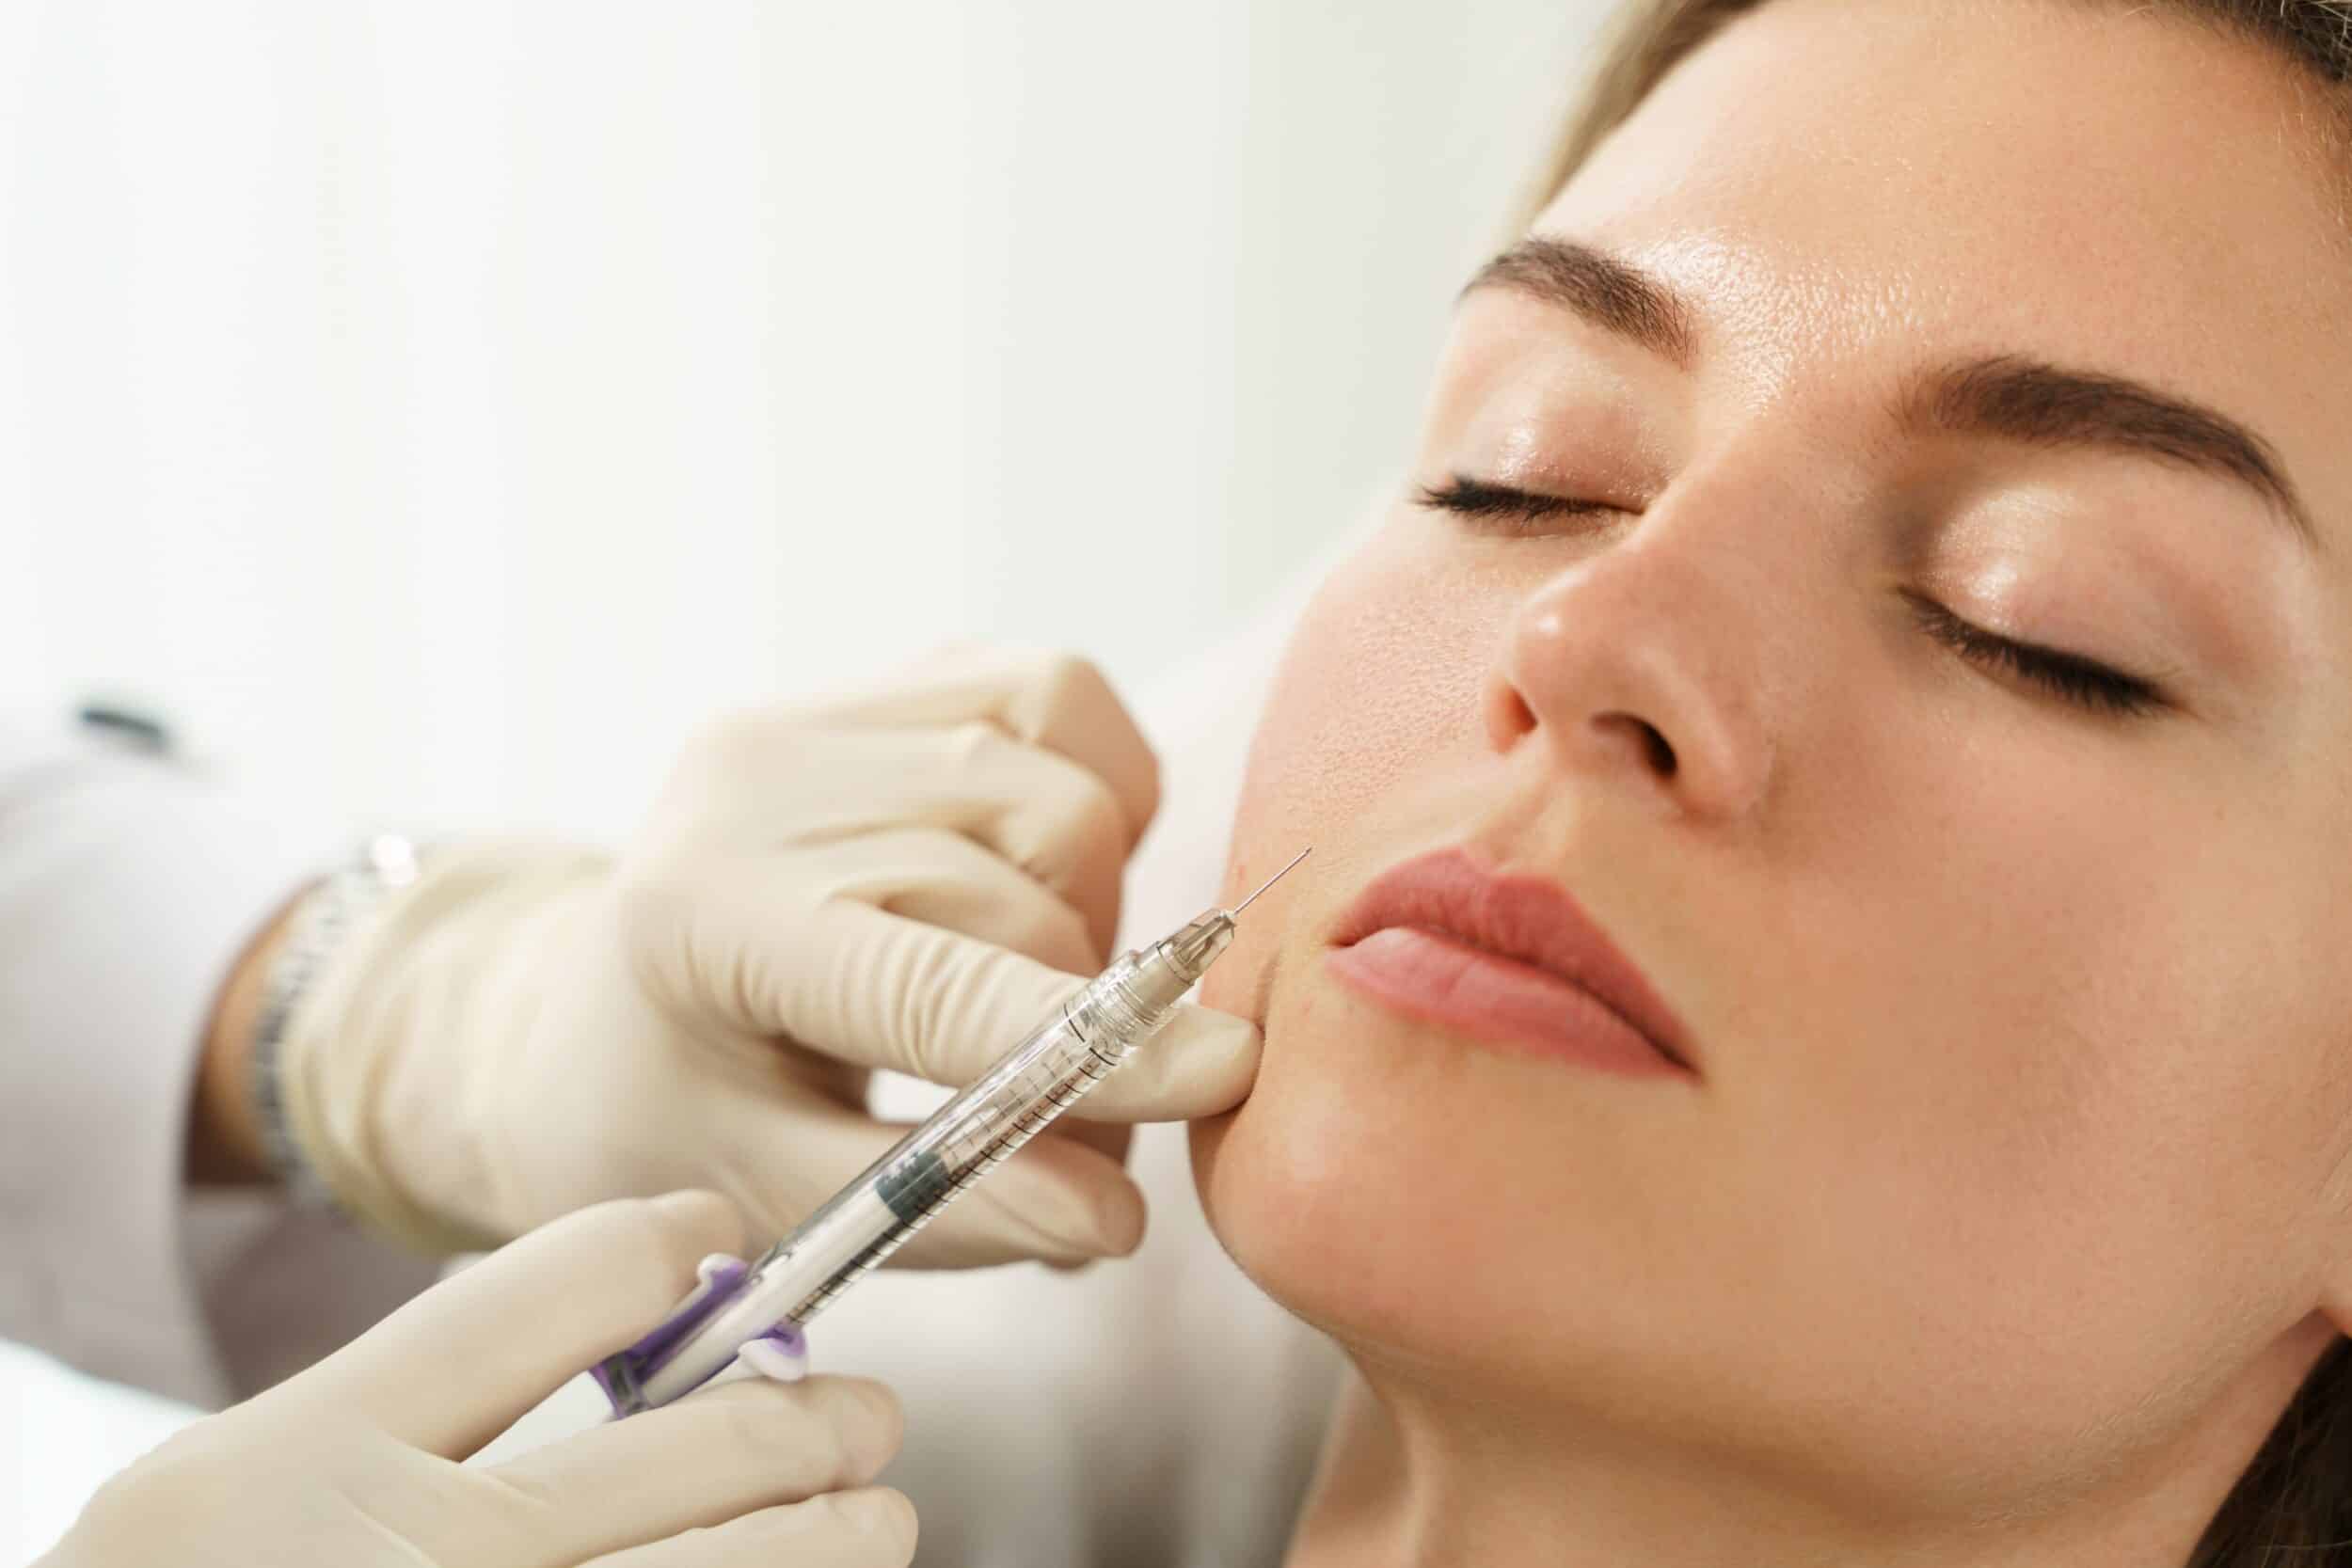 Juvederm injections in Scottsdale give woman a full, youthful face.